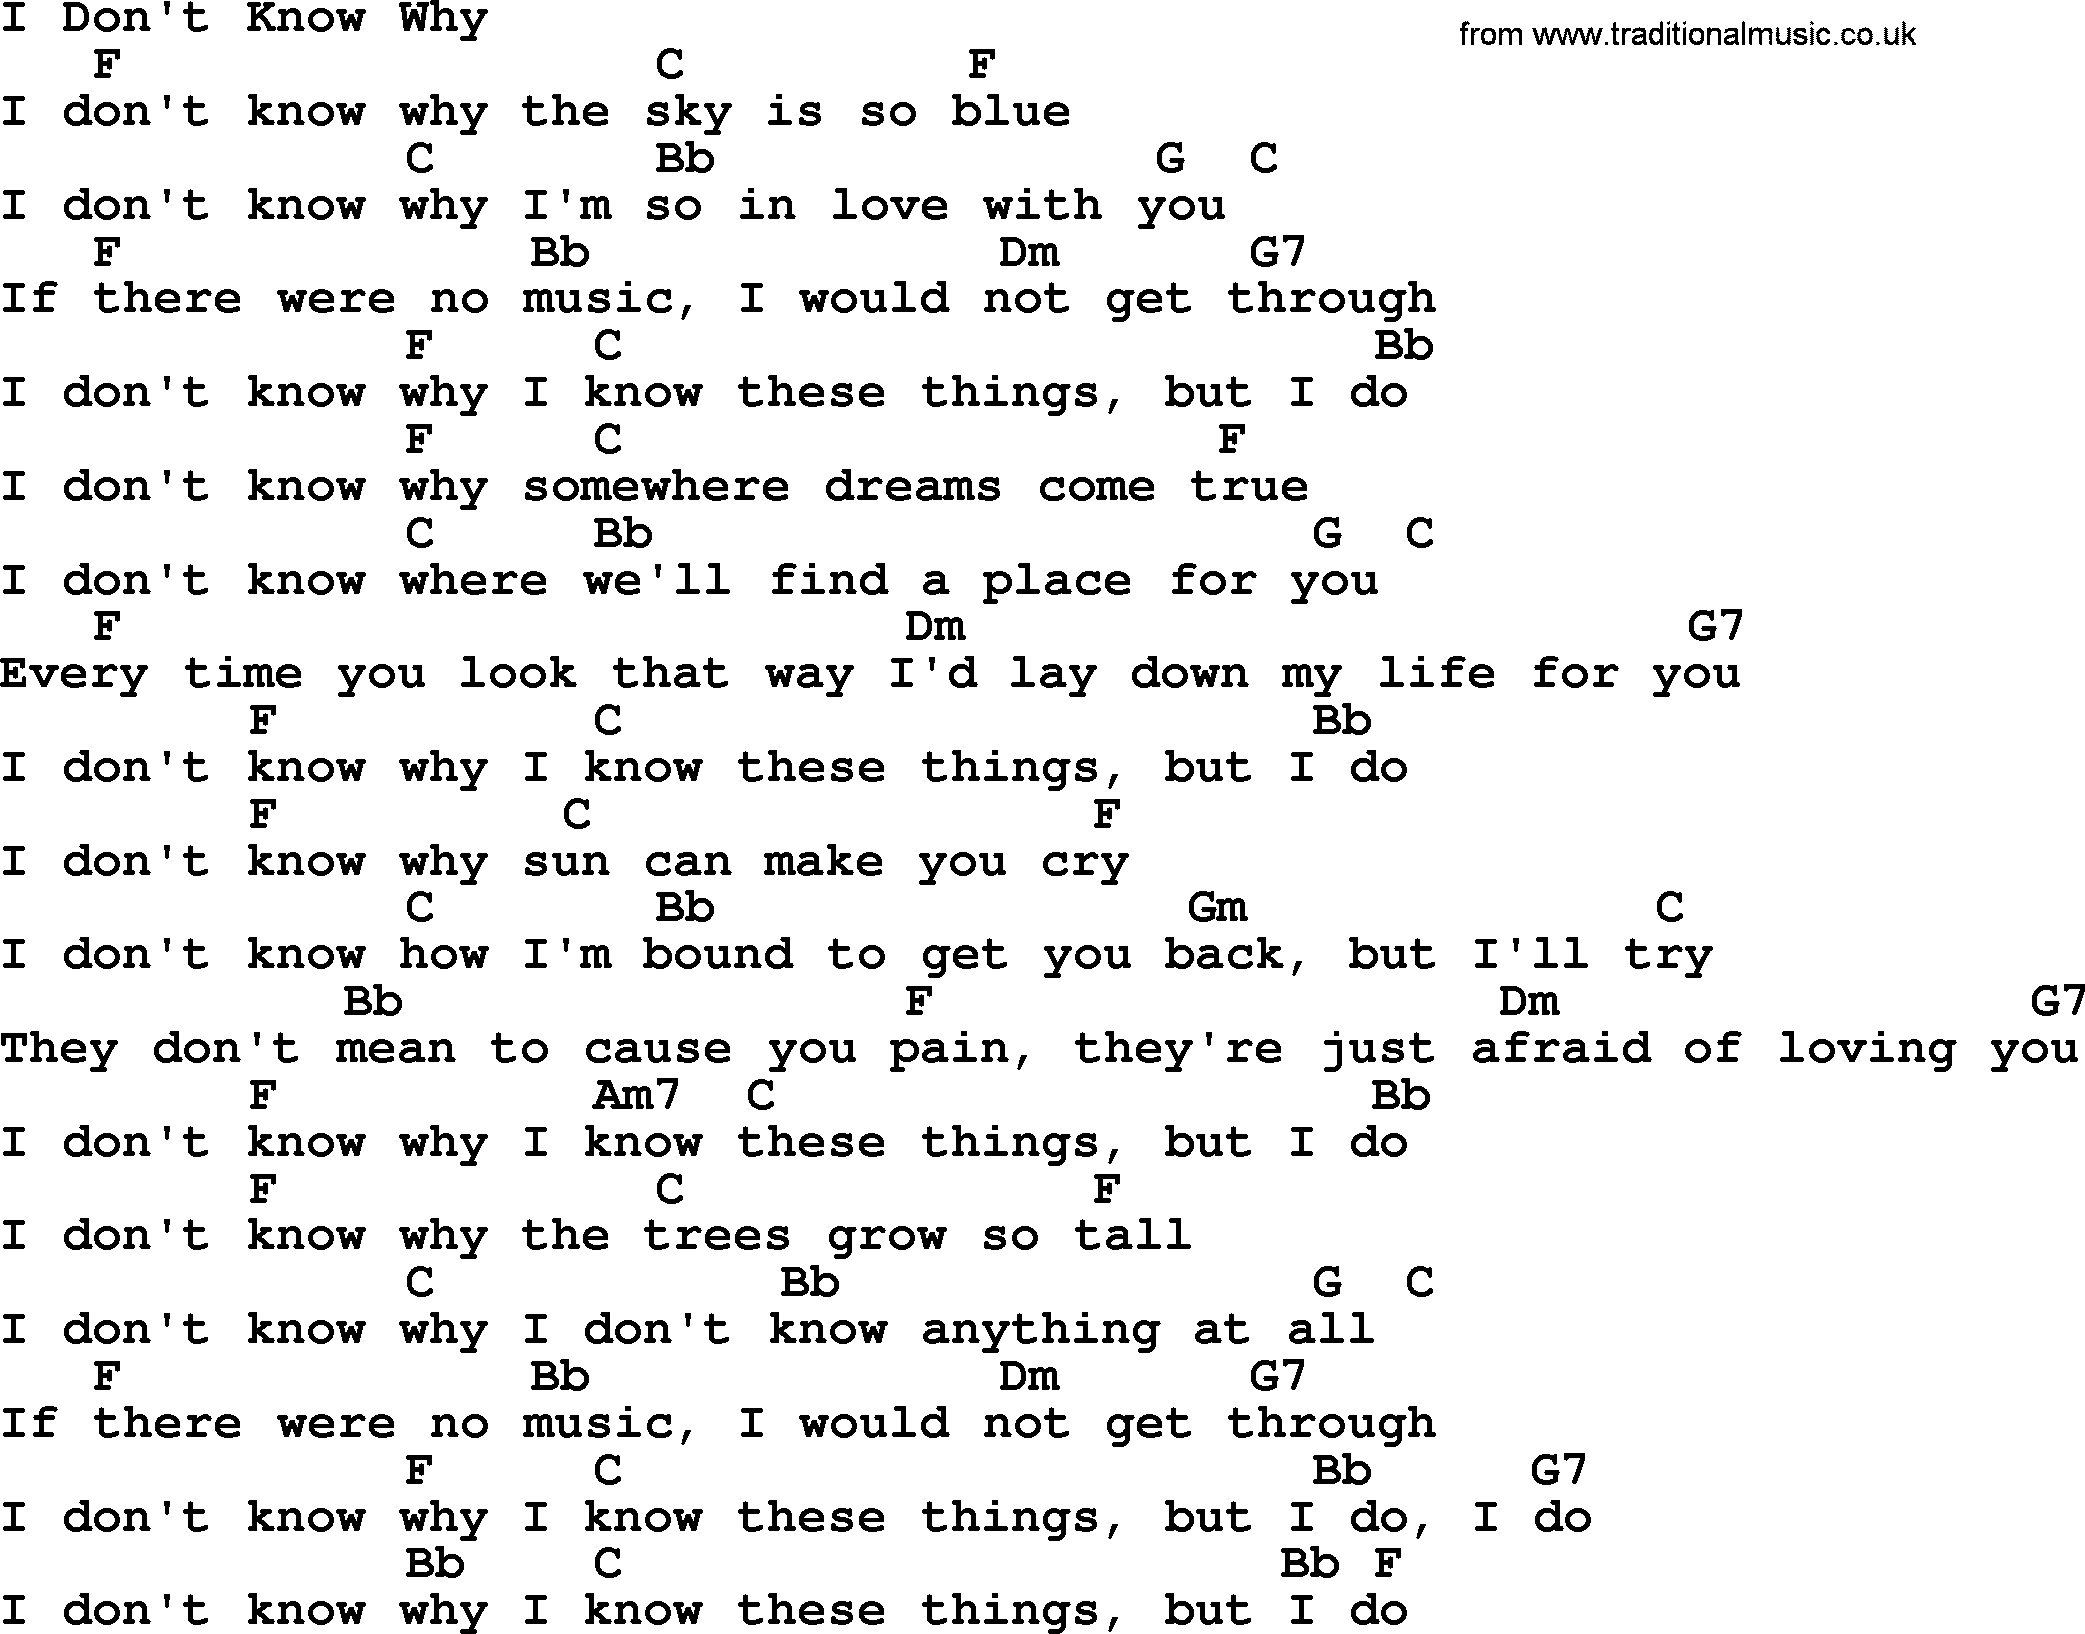 Bluegrass song: I Don't Know Why, lyrics and chords